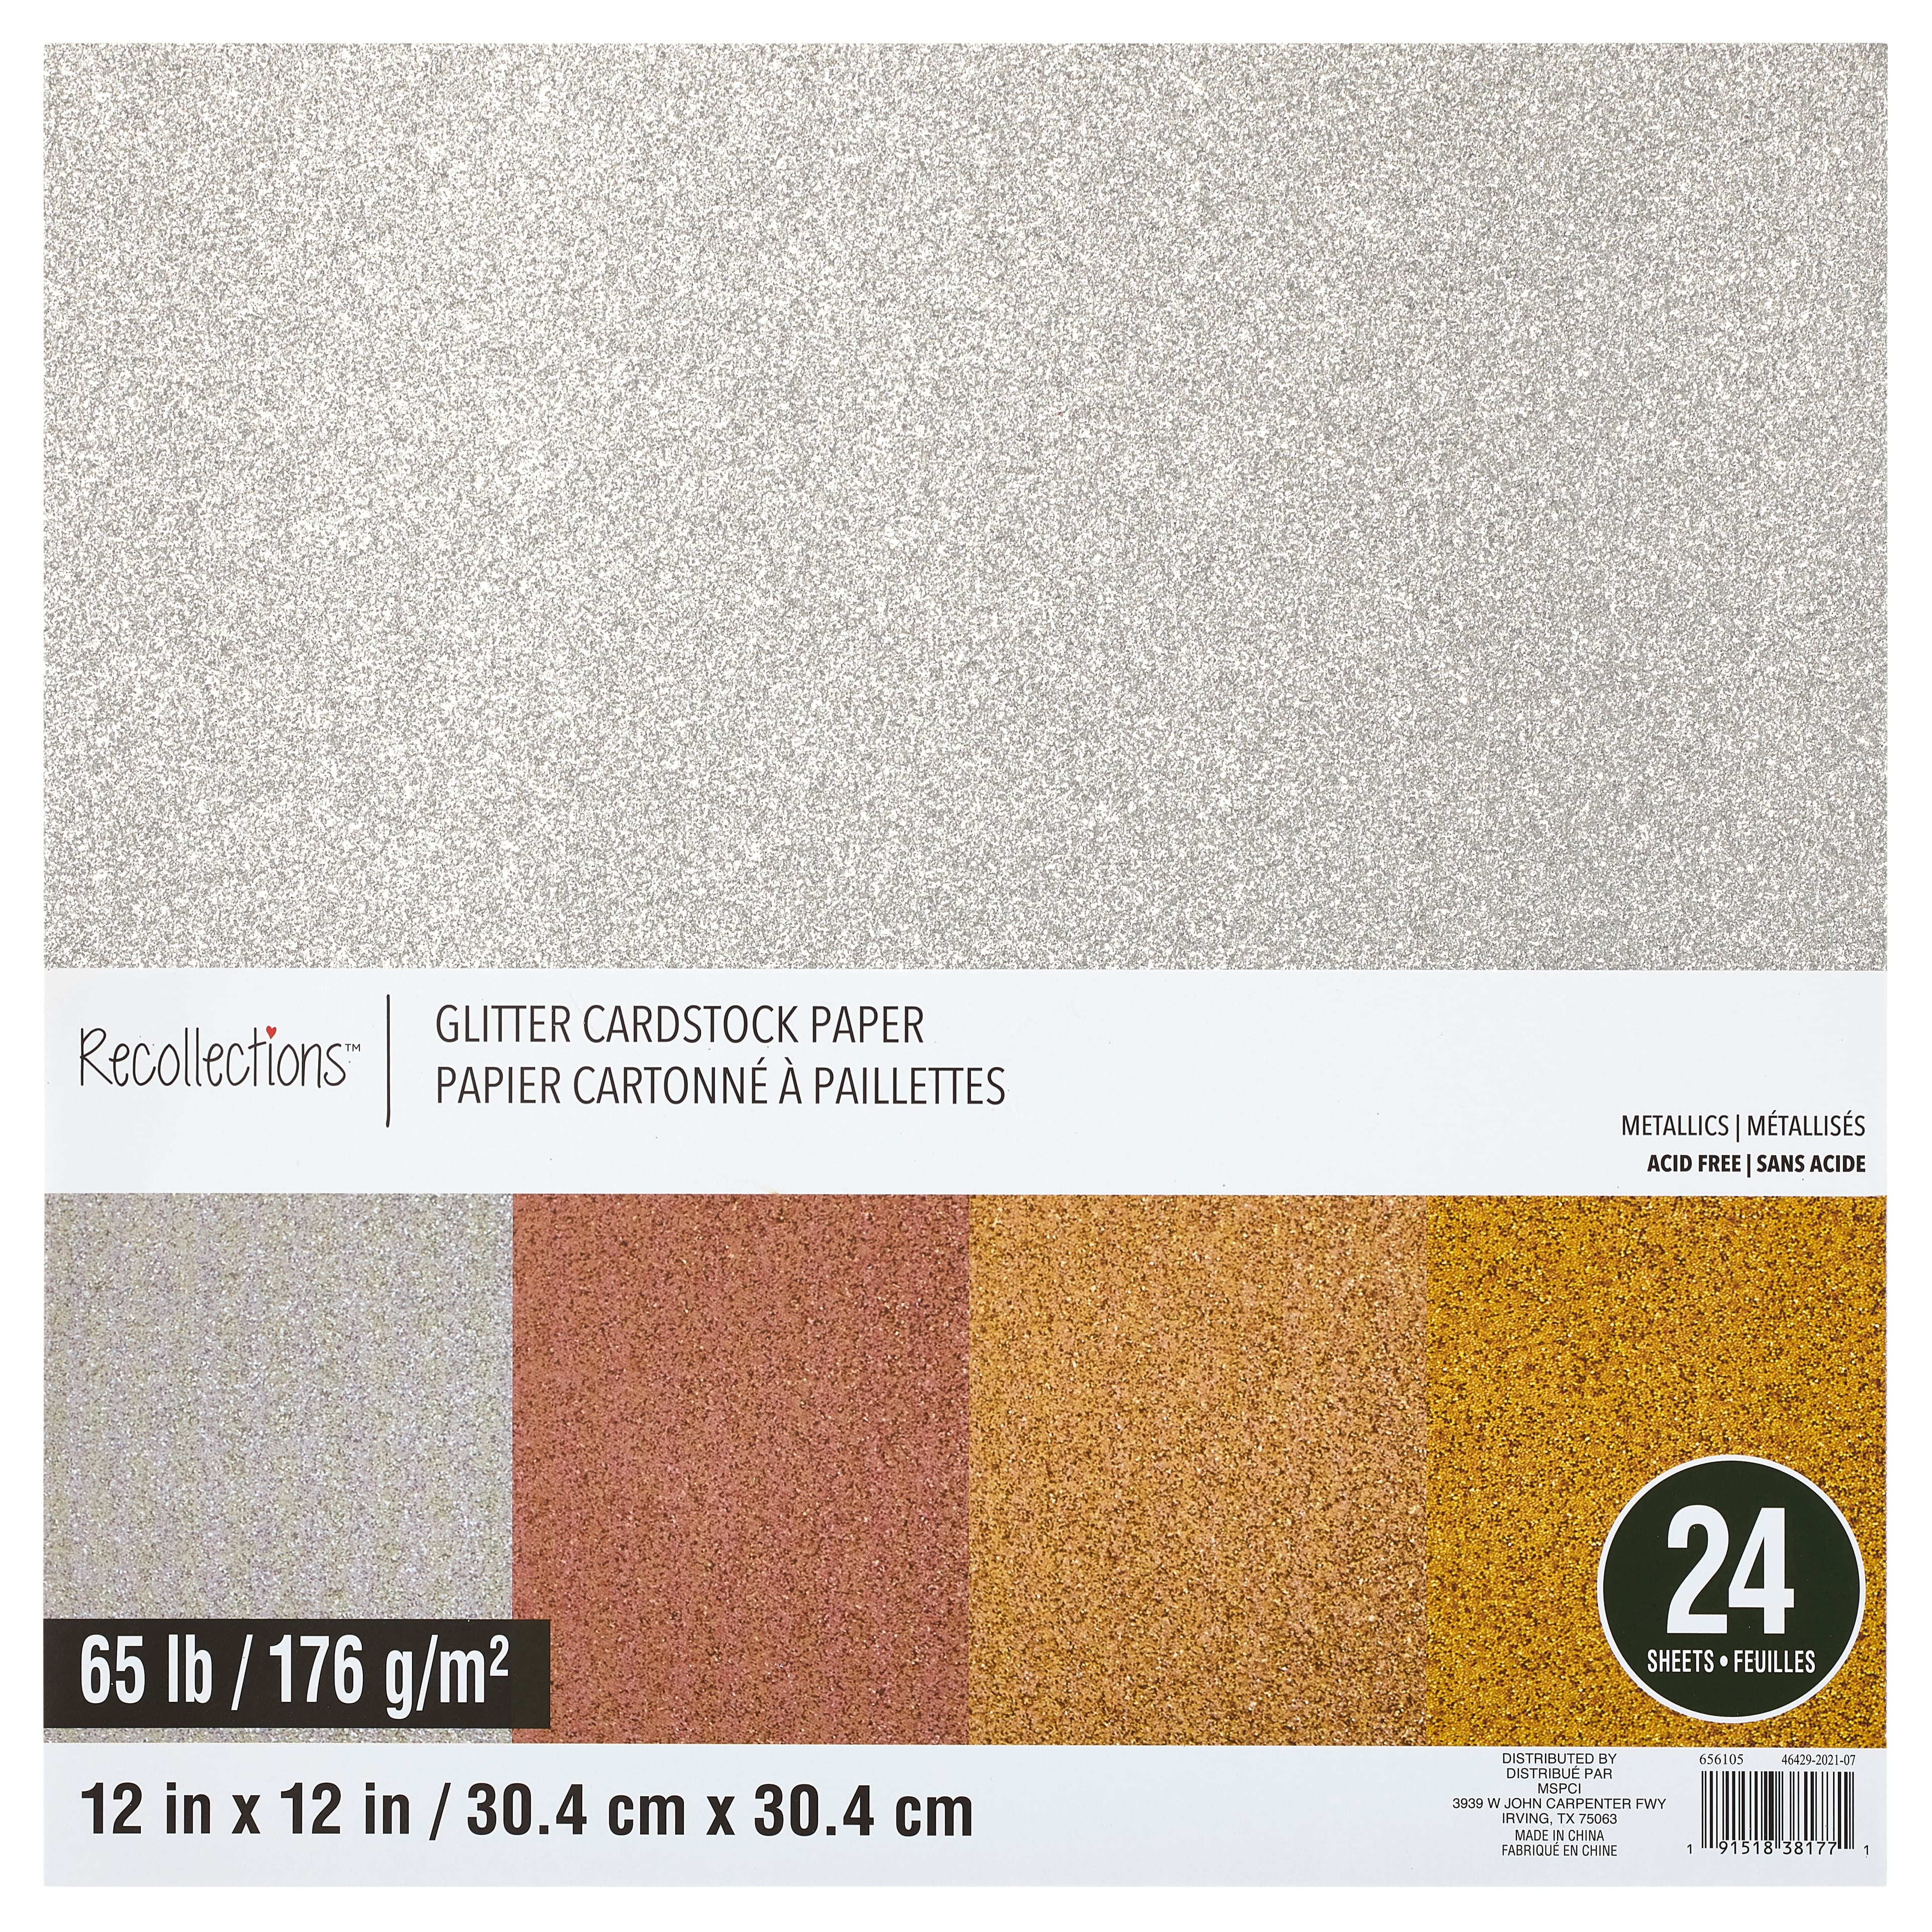  Recollections Cream Cardstock - 65lb  Cardstock-Papercardstock-Craft Cardstock - Cardstock Pack of 50 : Arts,  Crafts & Sewing